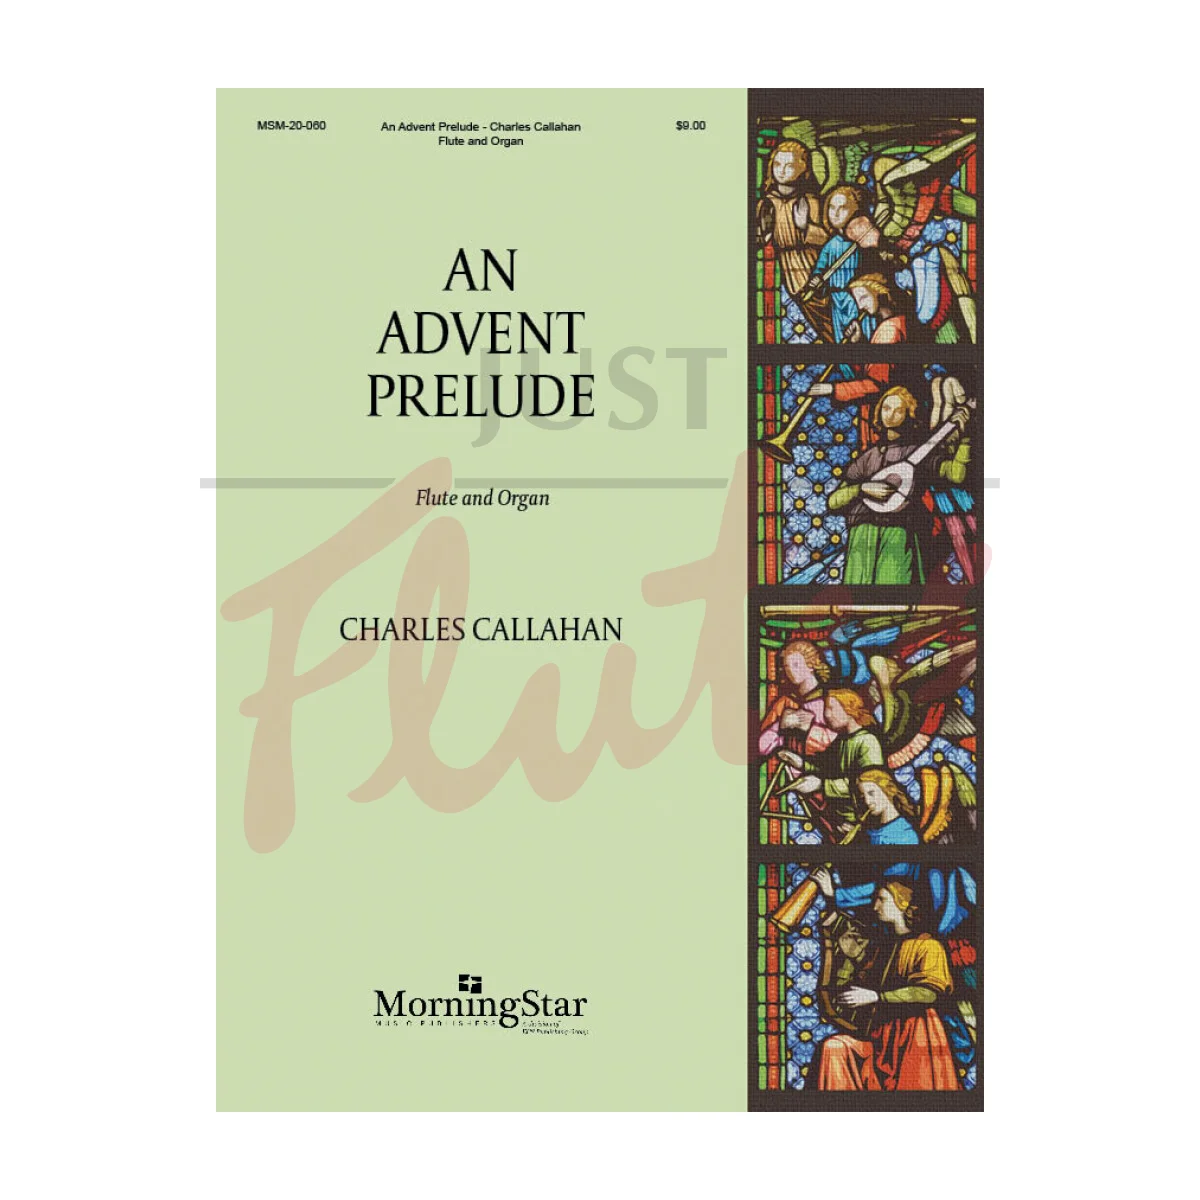 An Advent Prelude for Flute and Organ